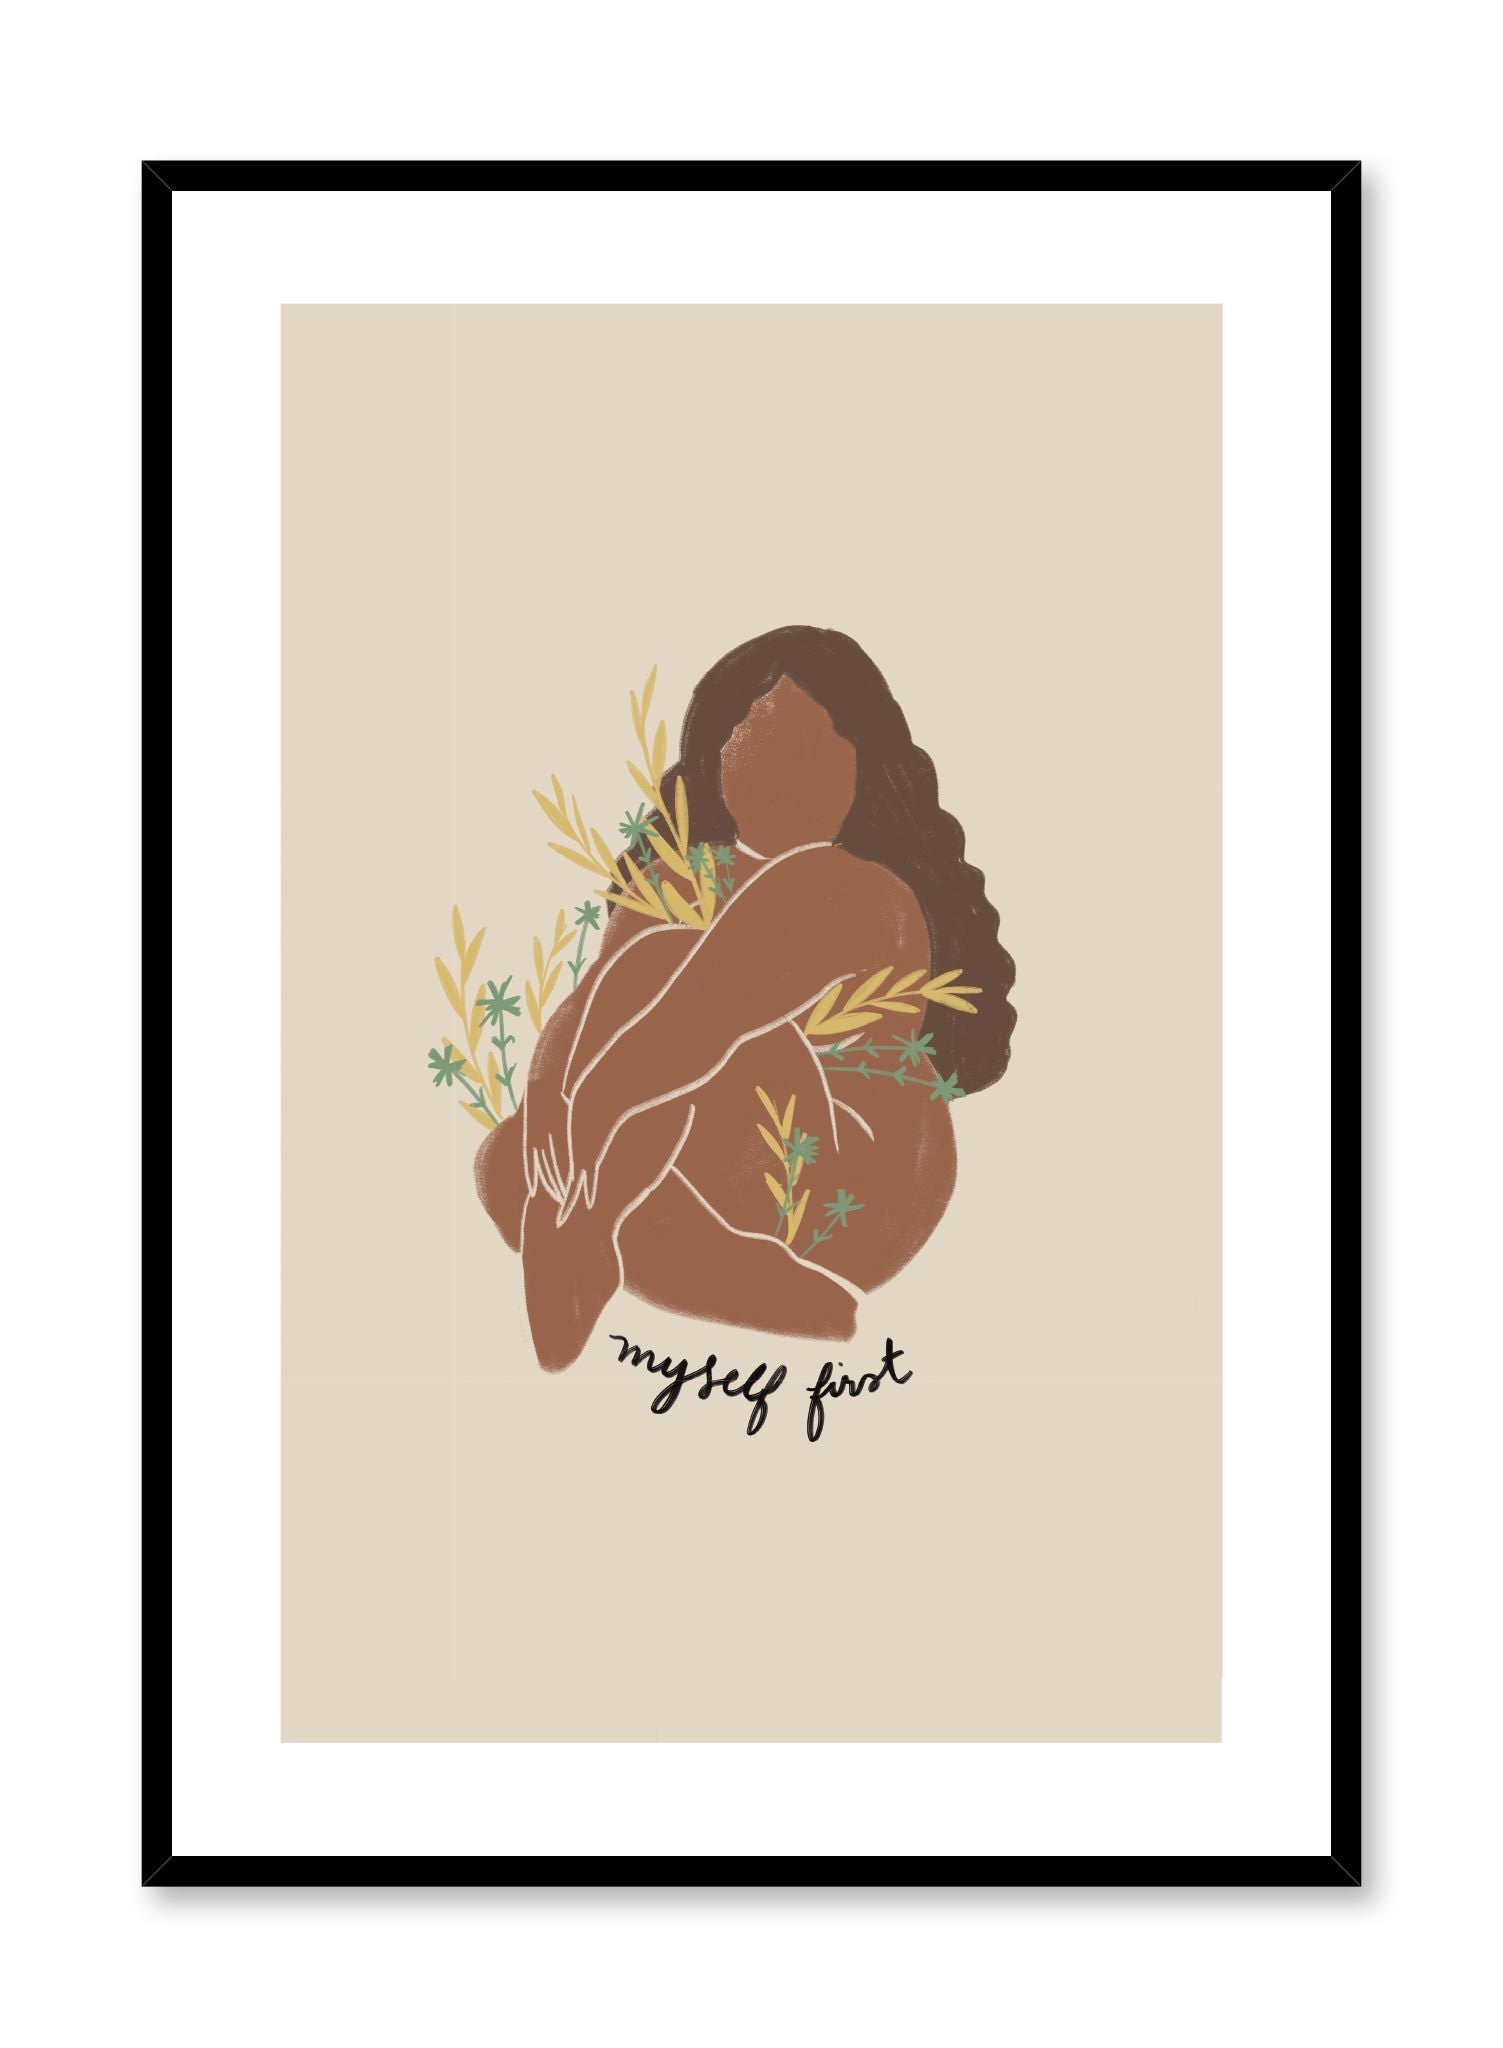 #1 Priority is a minimalist illustration by Opposite Wall of a woman hugging herself for some self-love with the words "Myself first" written underneath. 